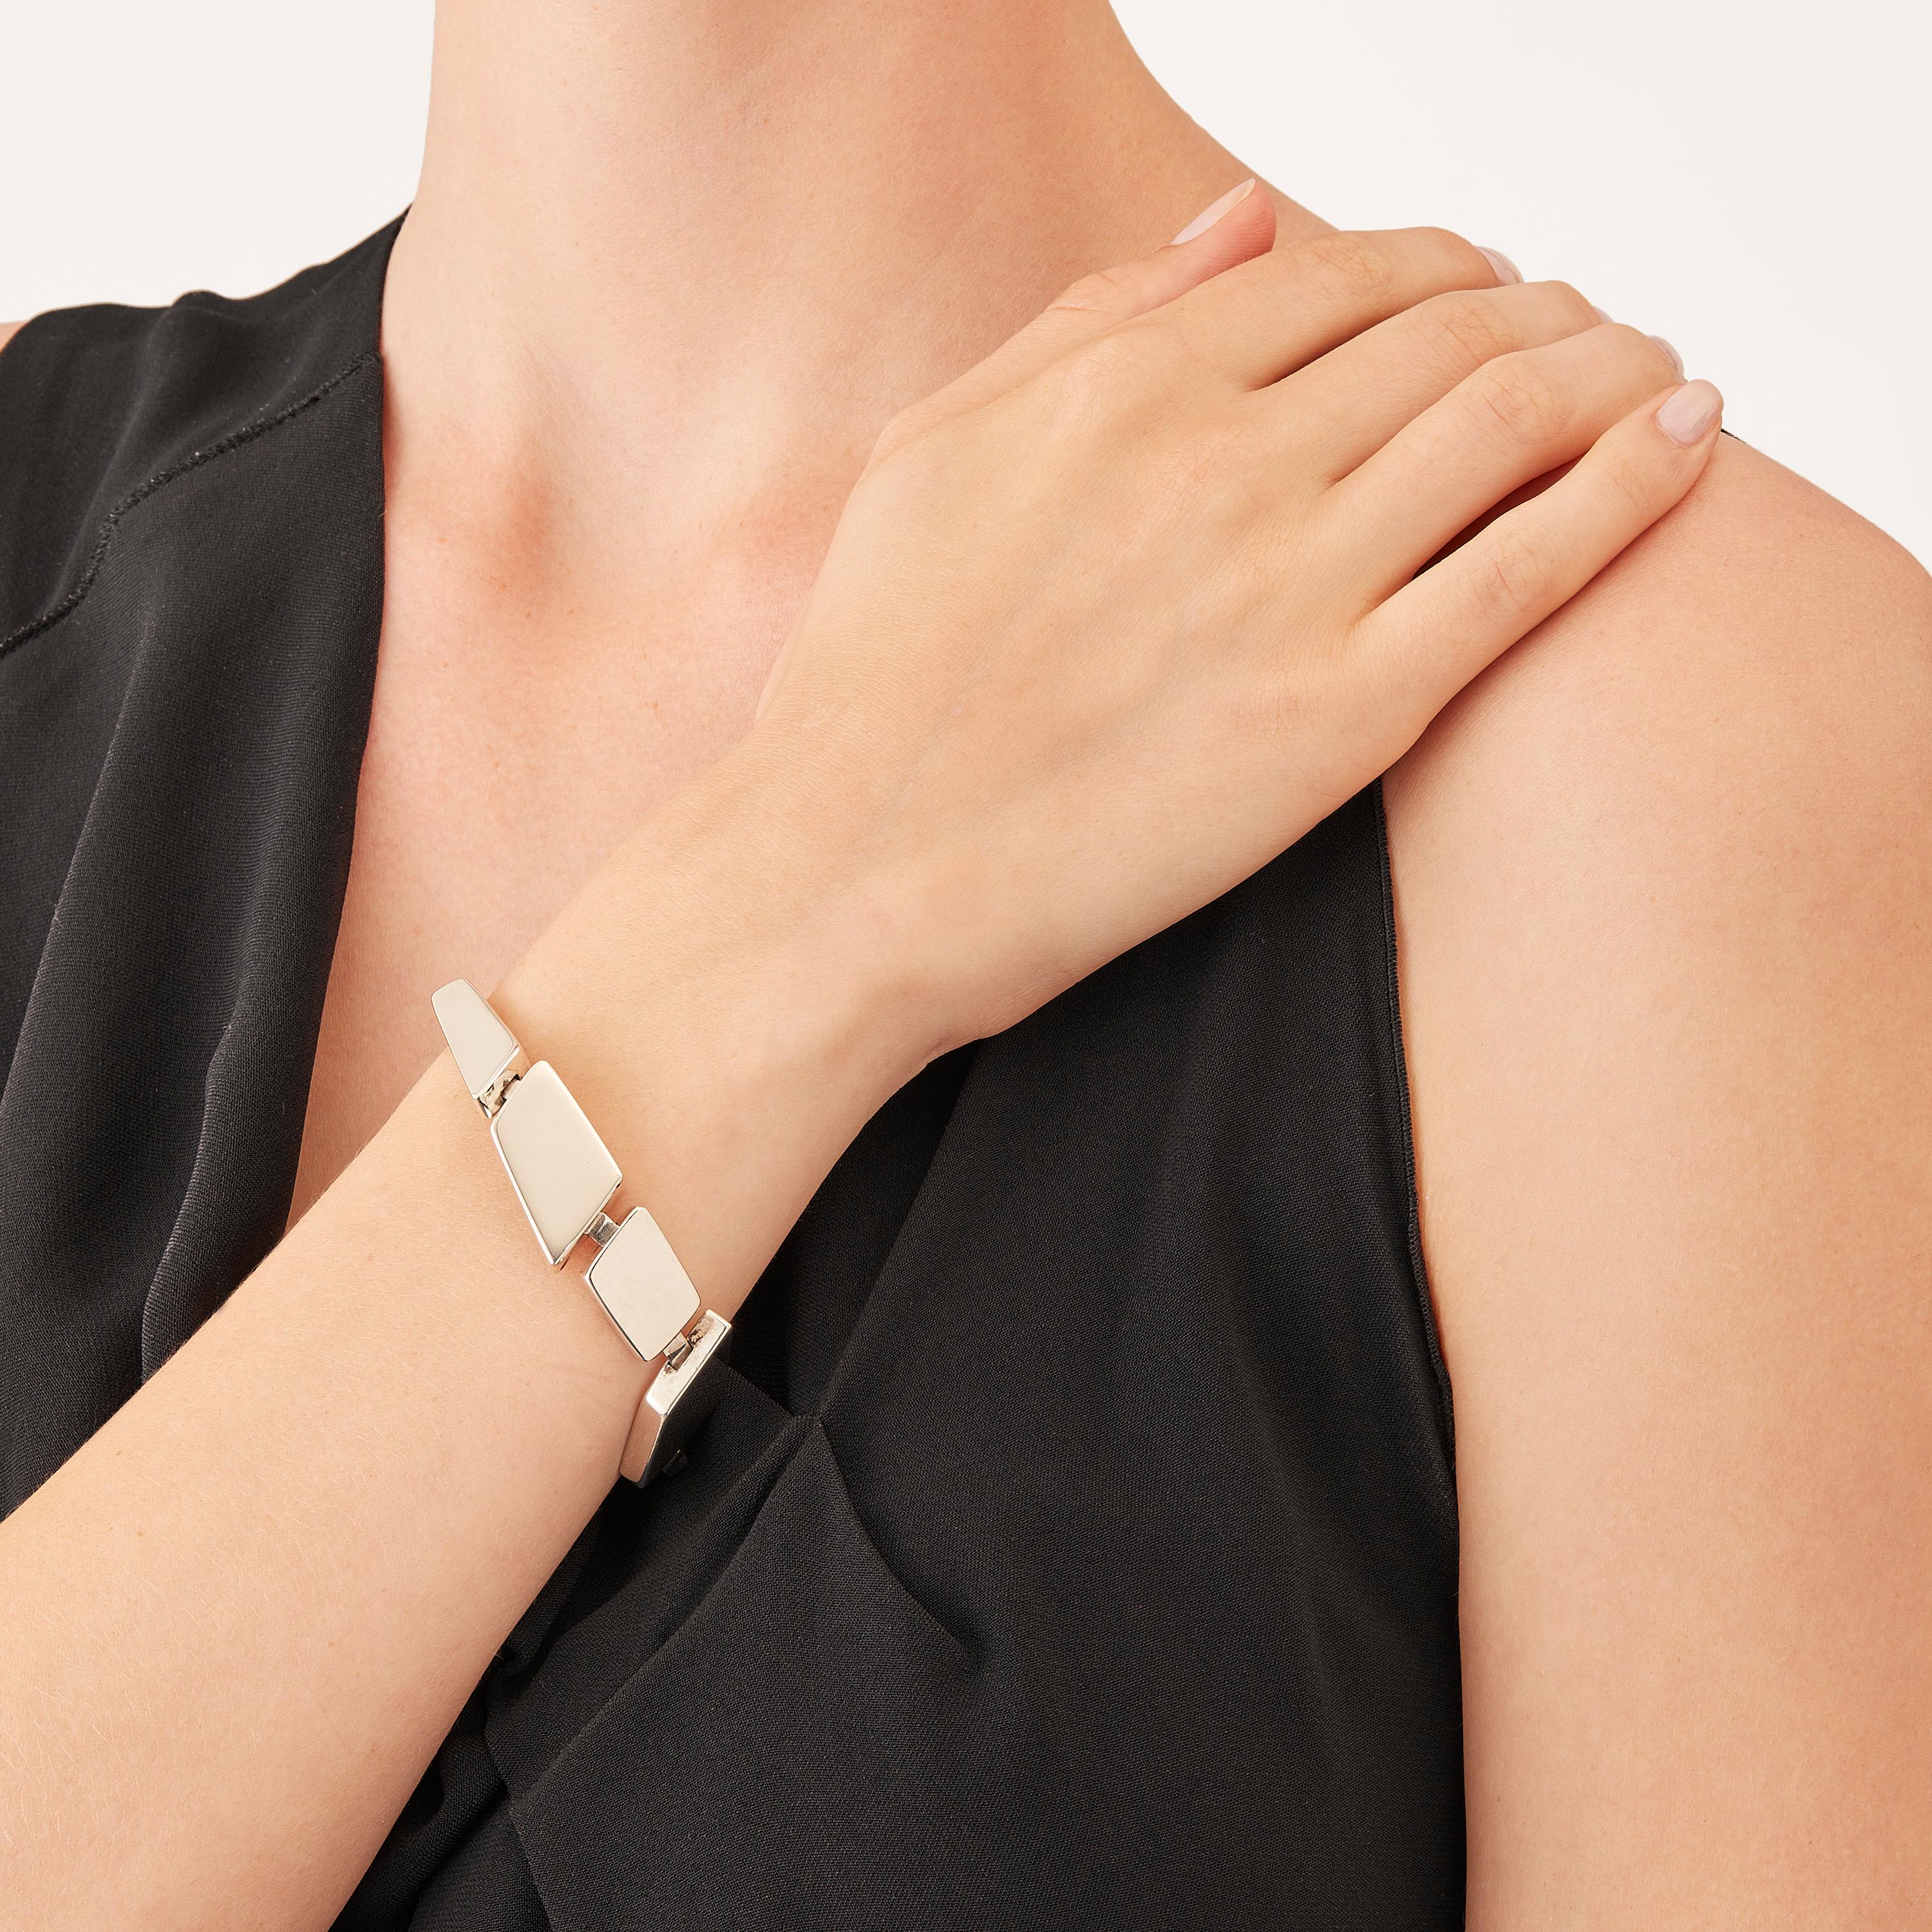 Made by hand in Nathalie Jean's Milan atelier in limited edition, Saphir Absolu Bracelet is composed of light hollow geometric volumes with rounded edges, in sterling silver. Clever hidden links allow the pieces to wrap nicely around the wrist. The